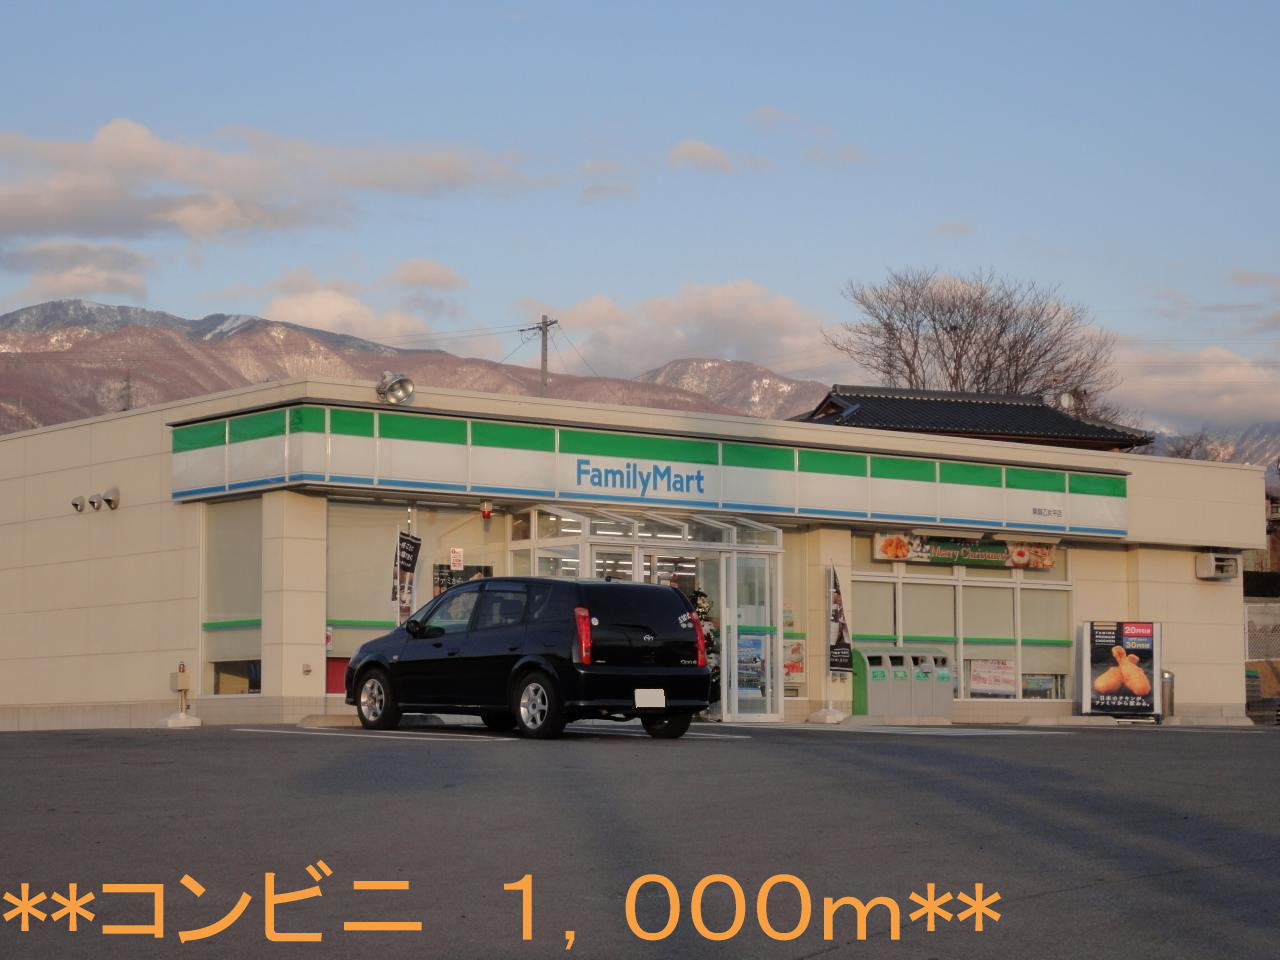 Convenience store. FamilyMart east 1000m to your maiden Hiramise (convenience store)